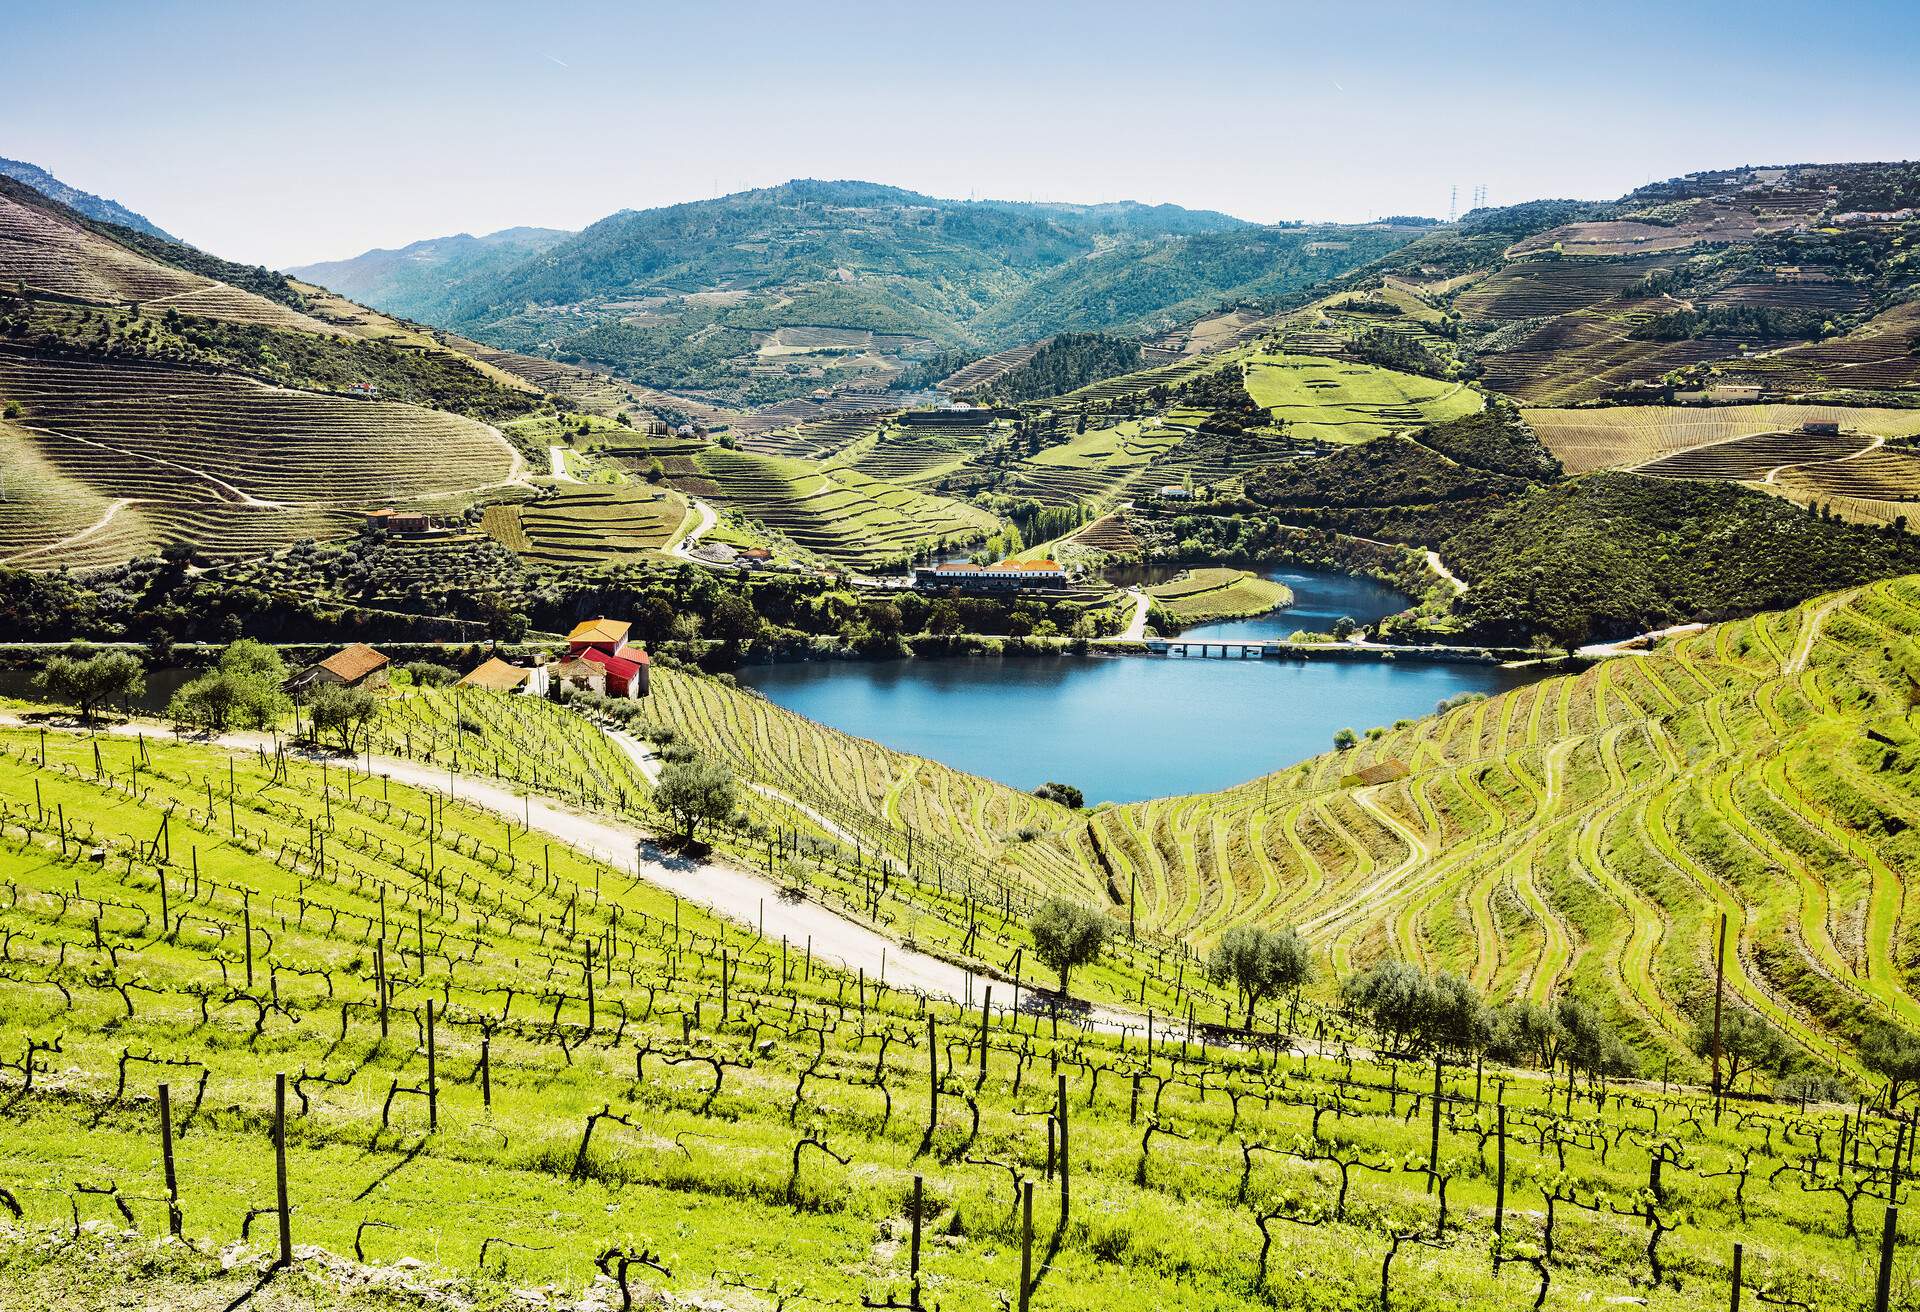 Douro Valley. Vineyards and landscape near Pinhao town, Portugal; Shutterstock ID 1011638089; Purpose: destiny; Brand (KAYAK, Momondo, Any): any